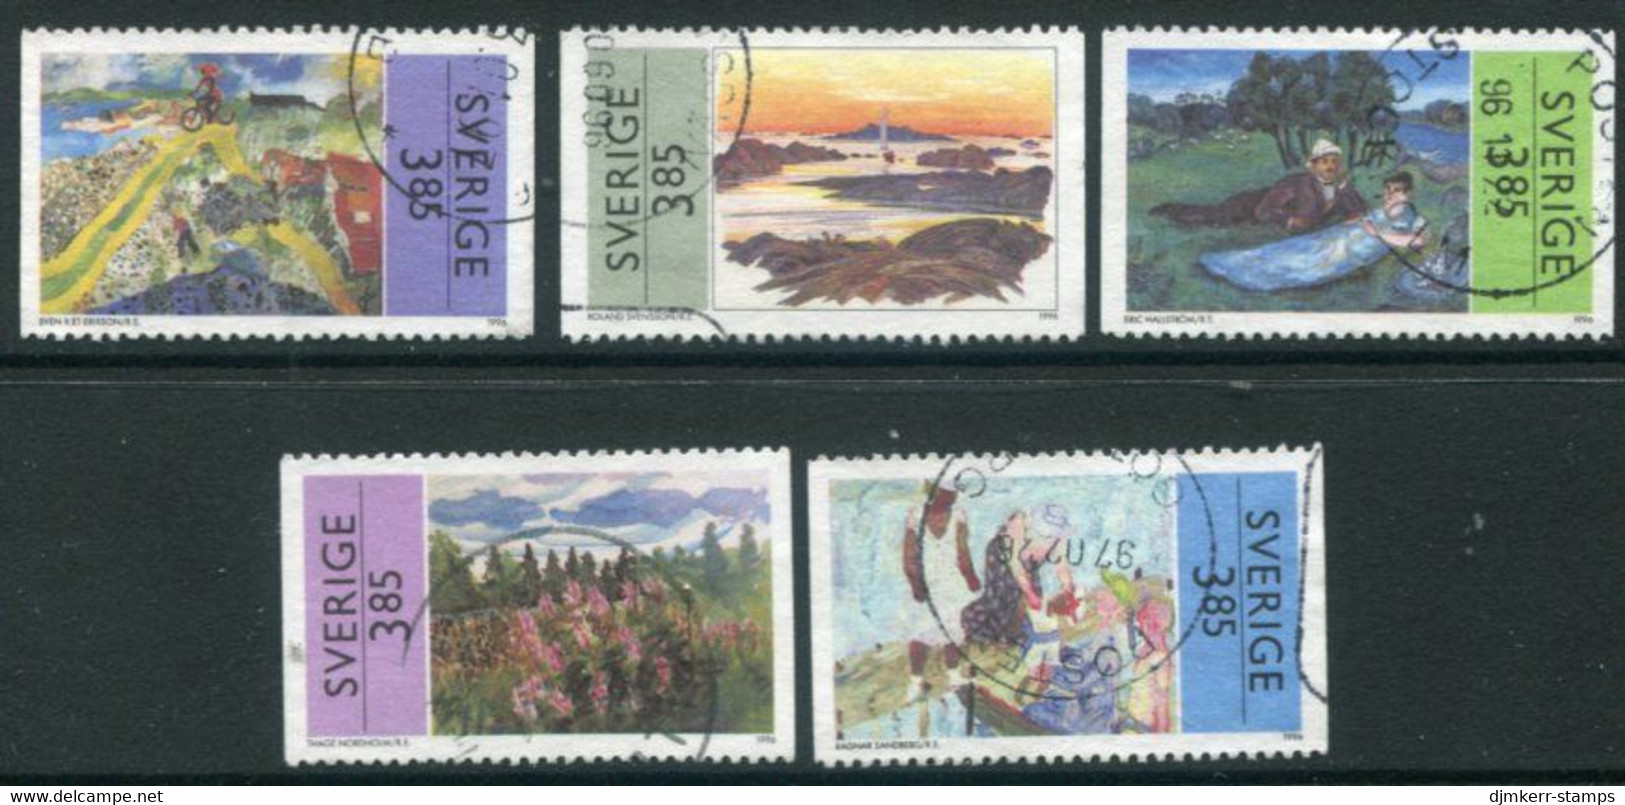 SWEDEN 1996 Paintings: Summer Used  Michel 1945-49 - Used Stamps